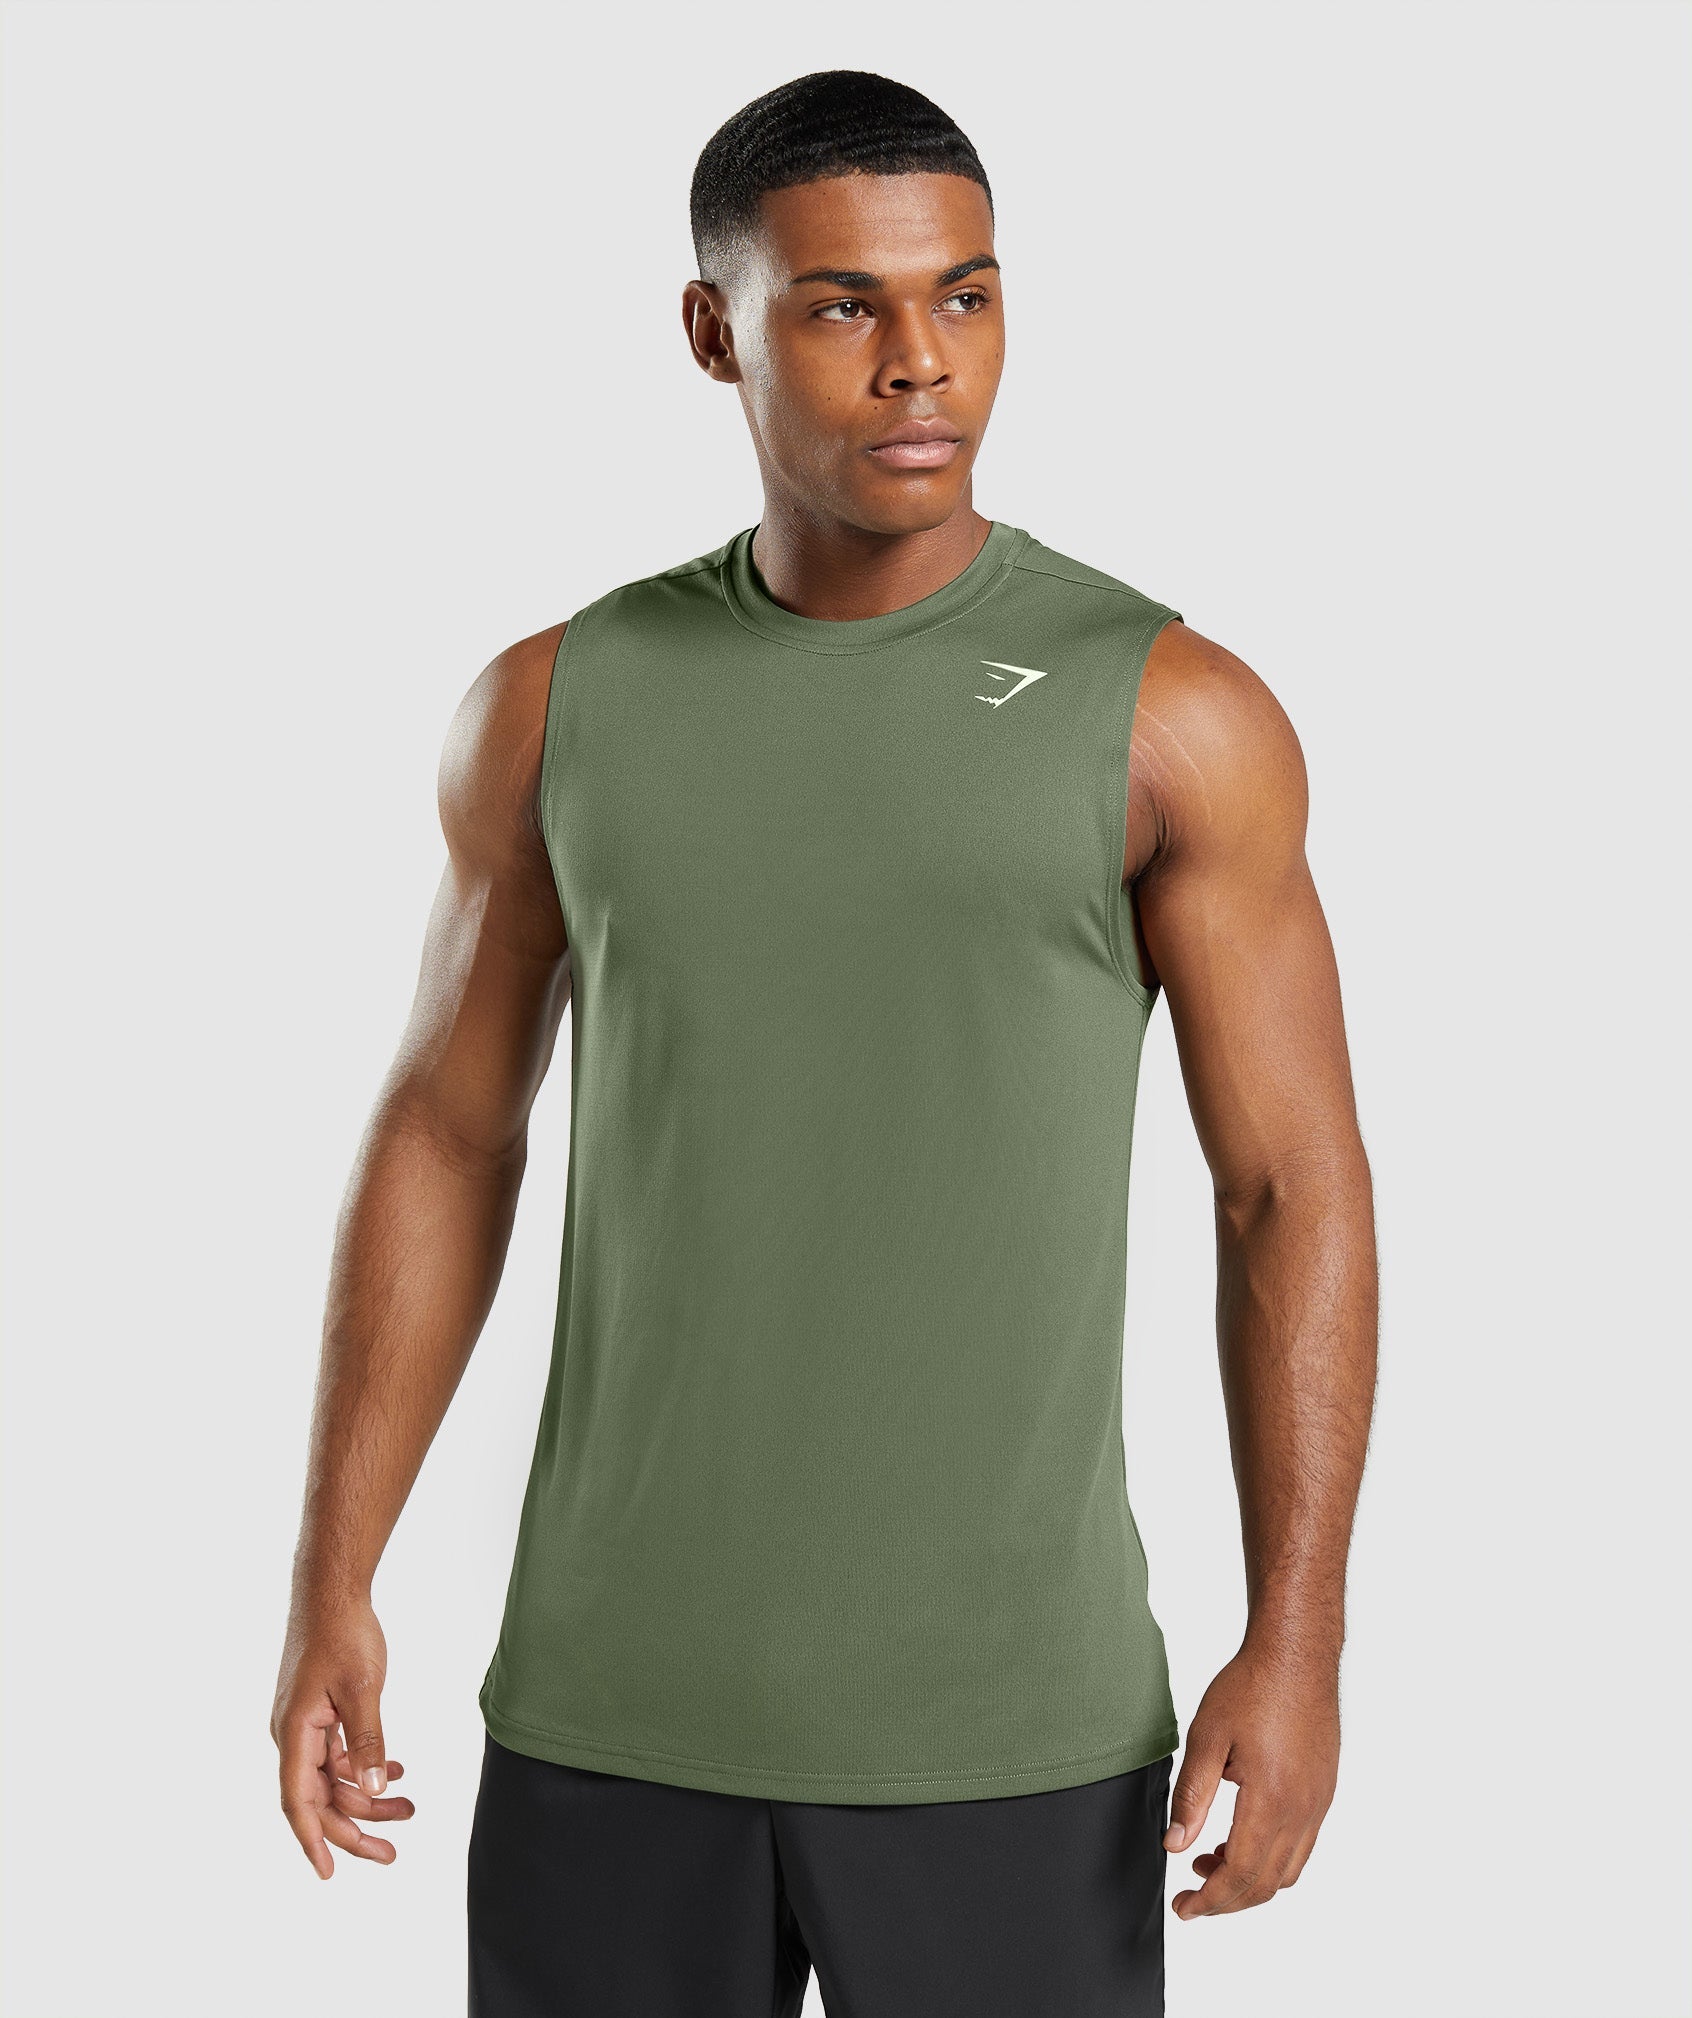 Arrival Sleeveless T-Shirt in Core Olive - view 1